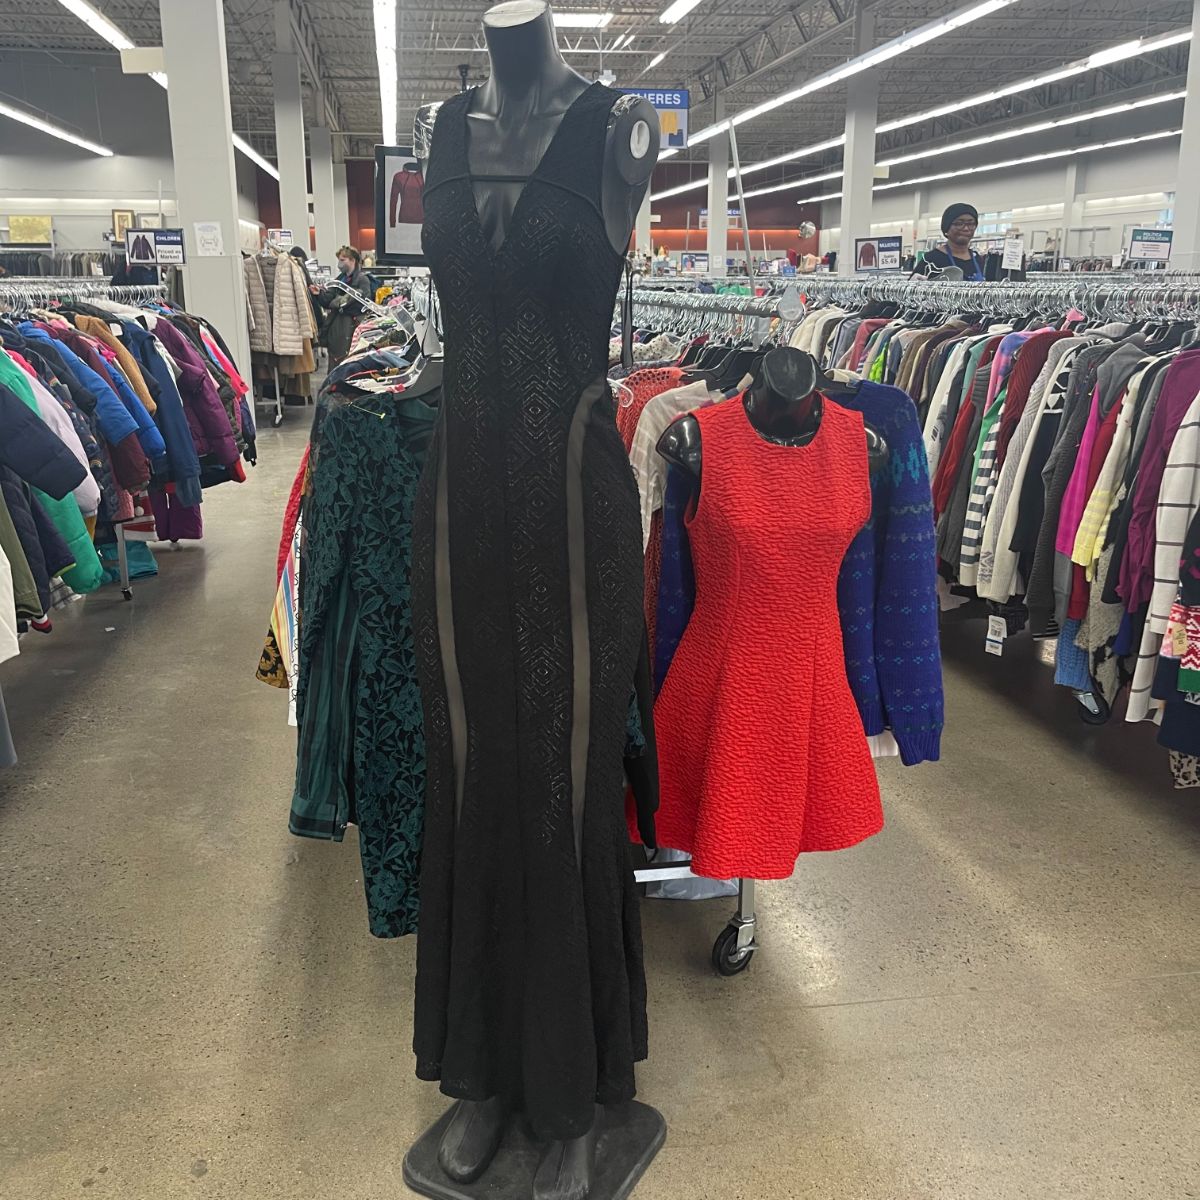 Gala season is upon us and you can find this and so many other show-stopping looks at your local #GoodwillMass! #ShopGoodwill #GoodwillFinds #GalaFashion